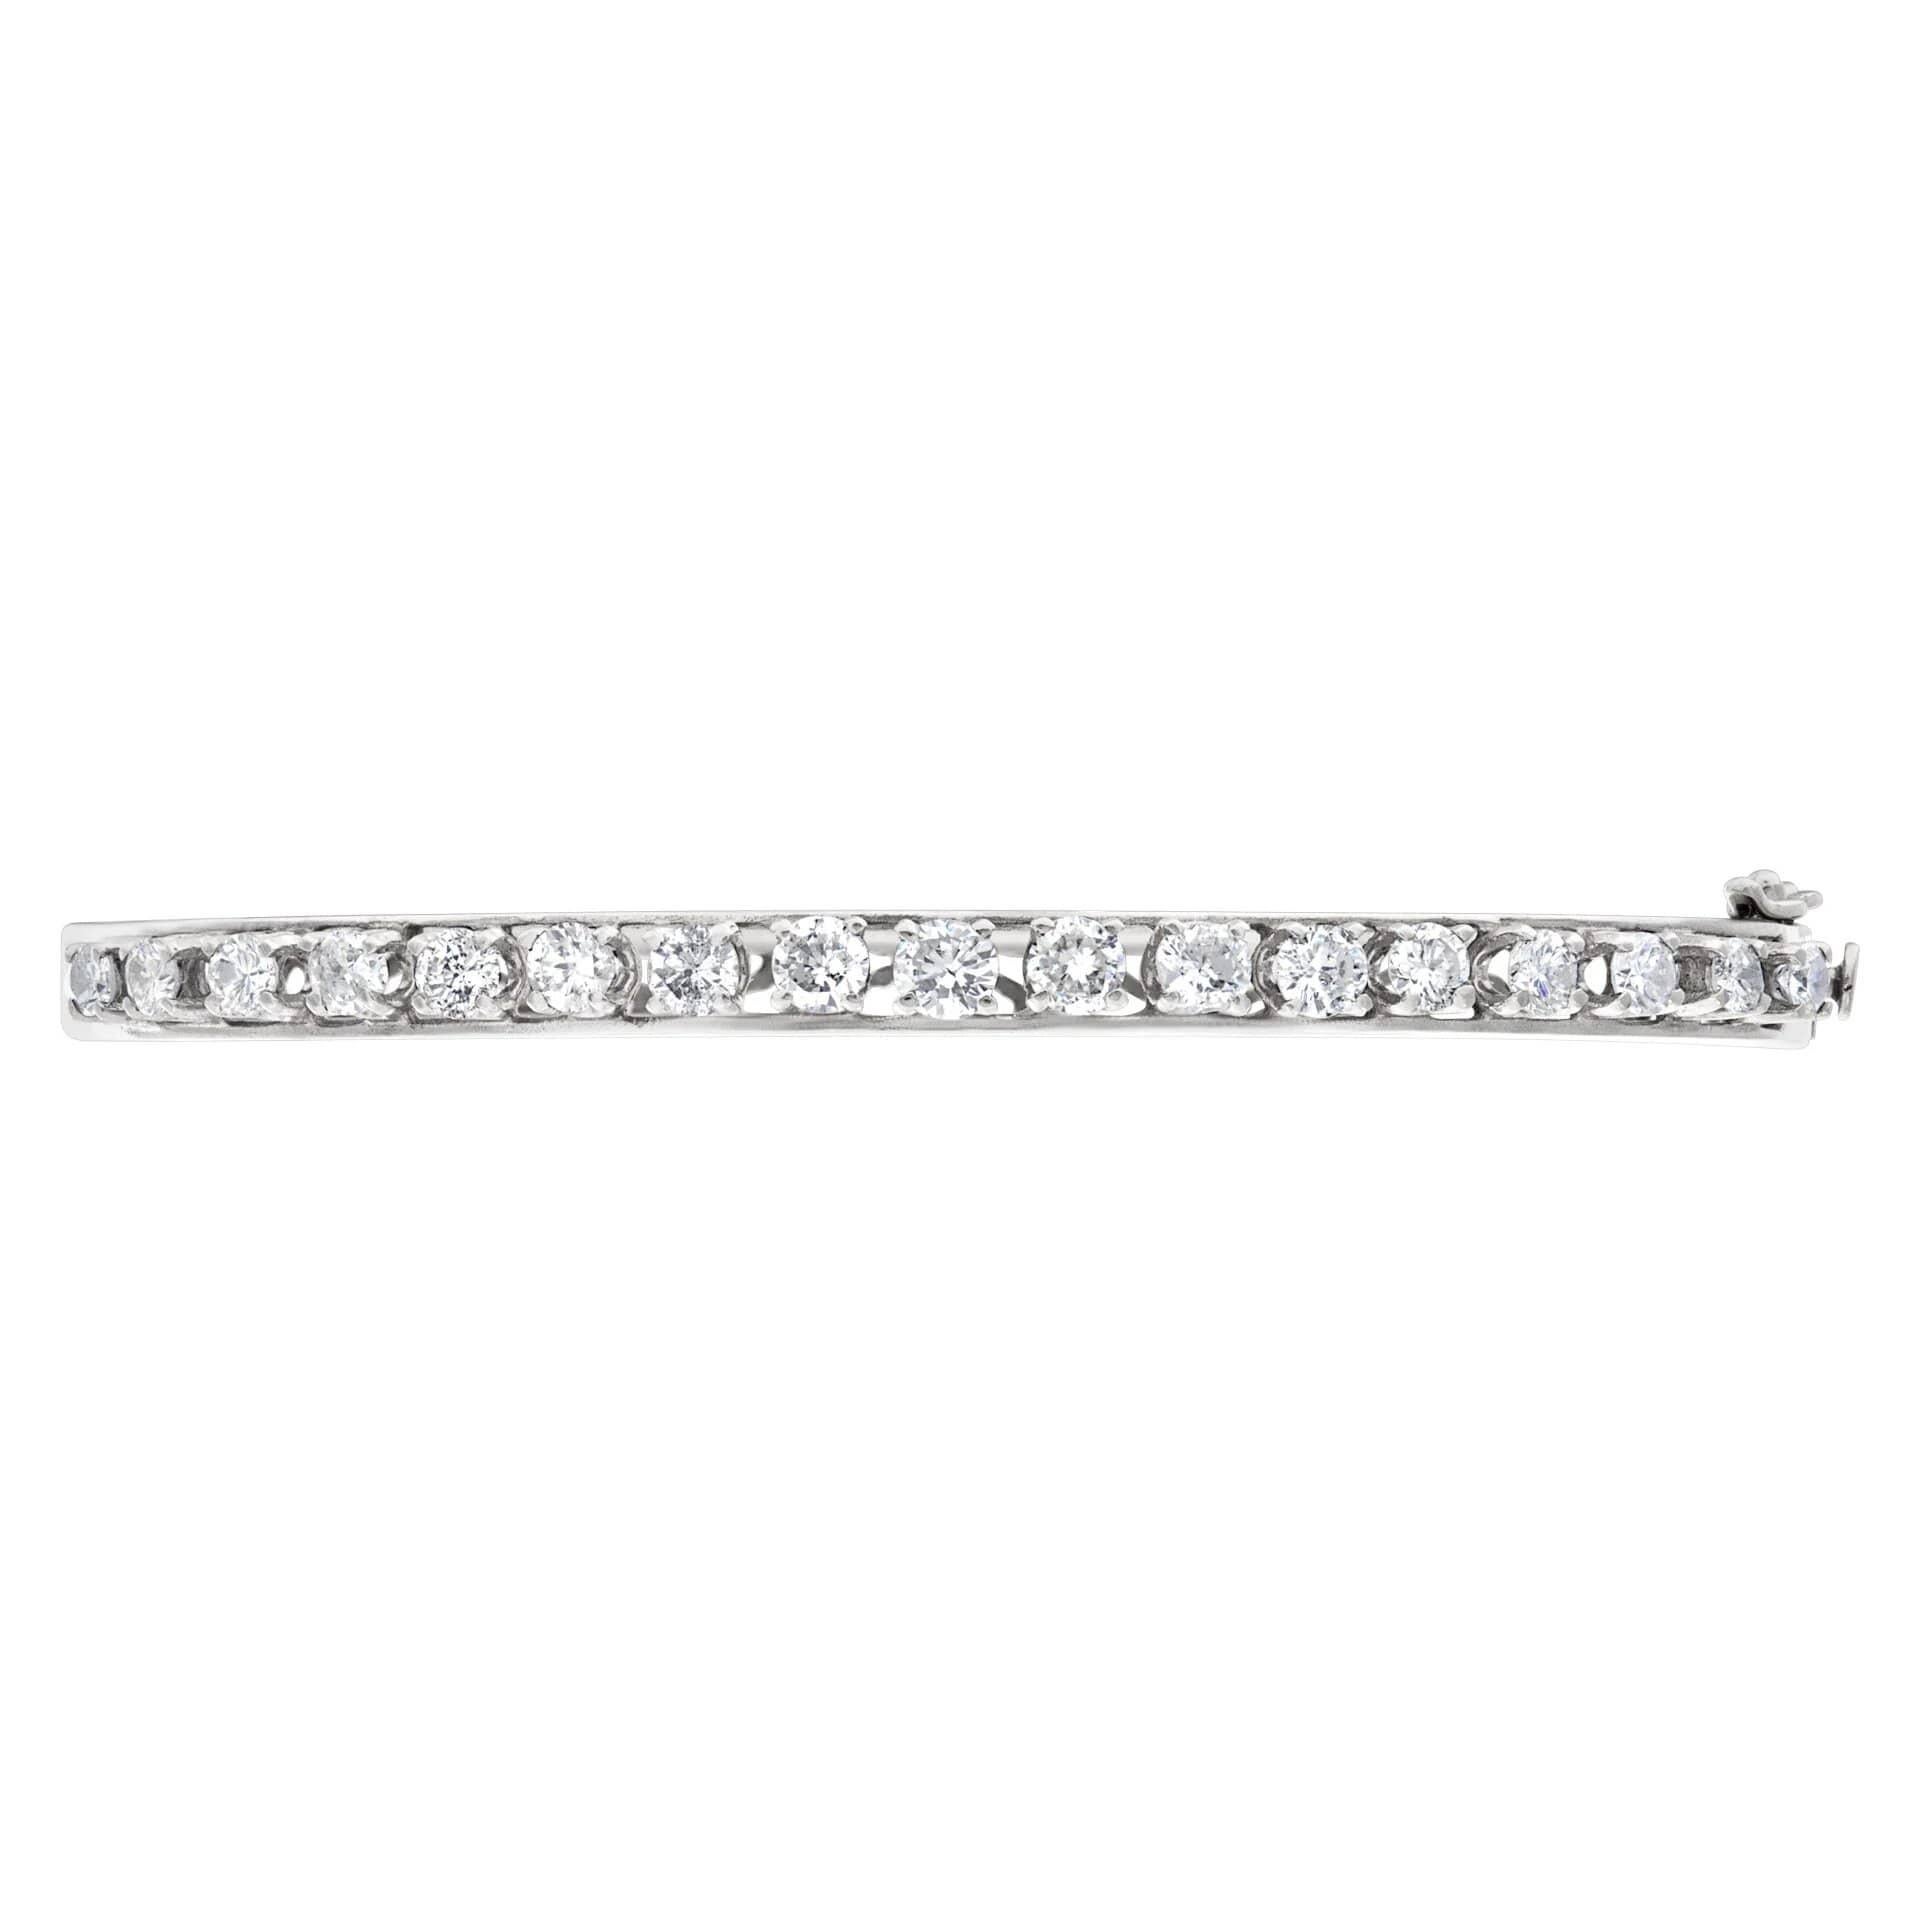 Diamond bangle with 1.70 carats in G-H color, VS-SIclarity round diamonds set in 14k white gold. Fits 6-7 inches.
